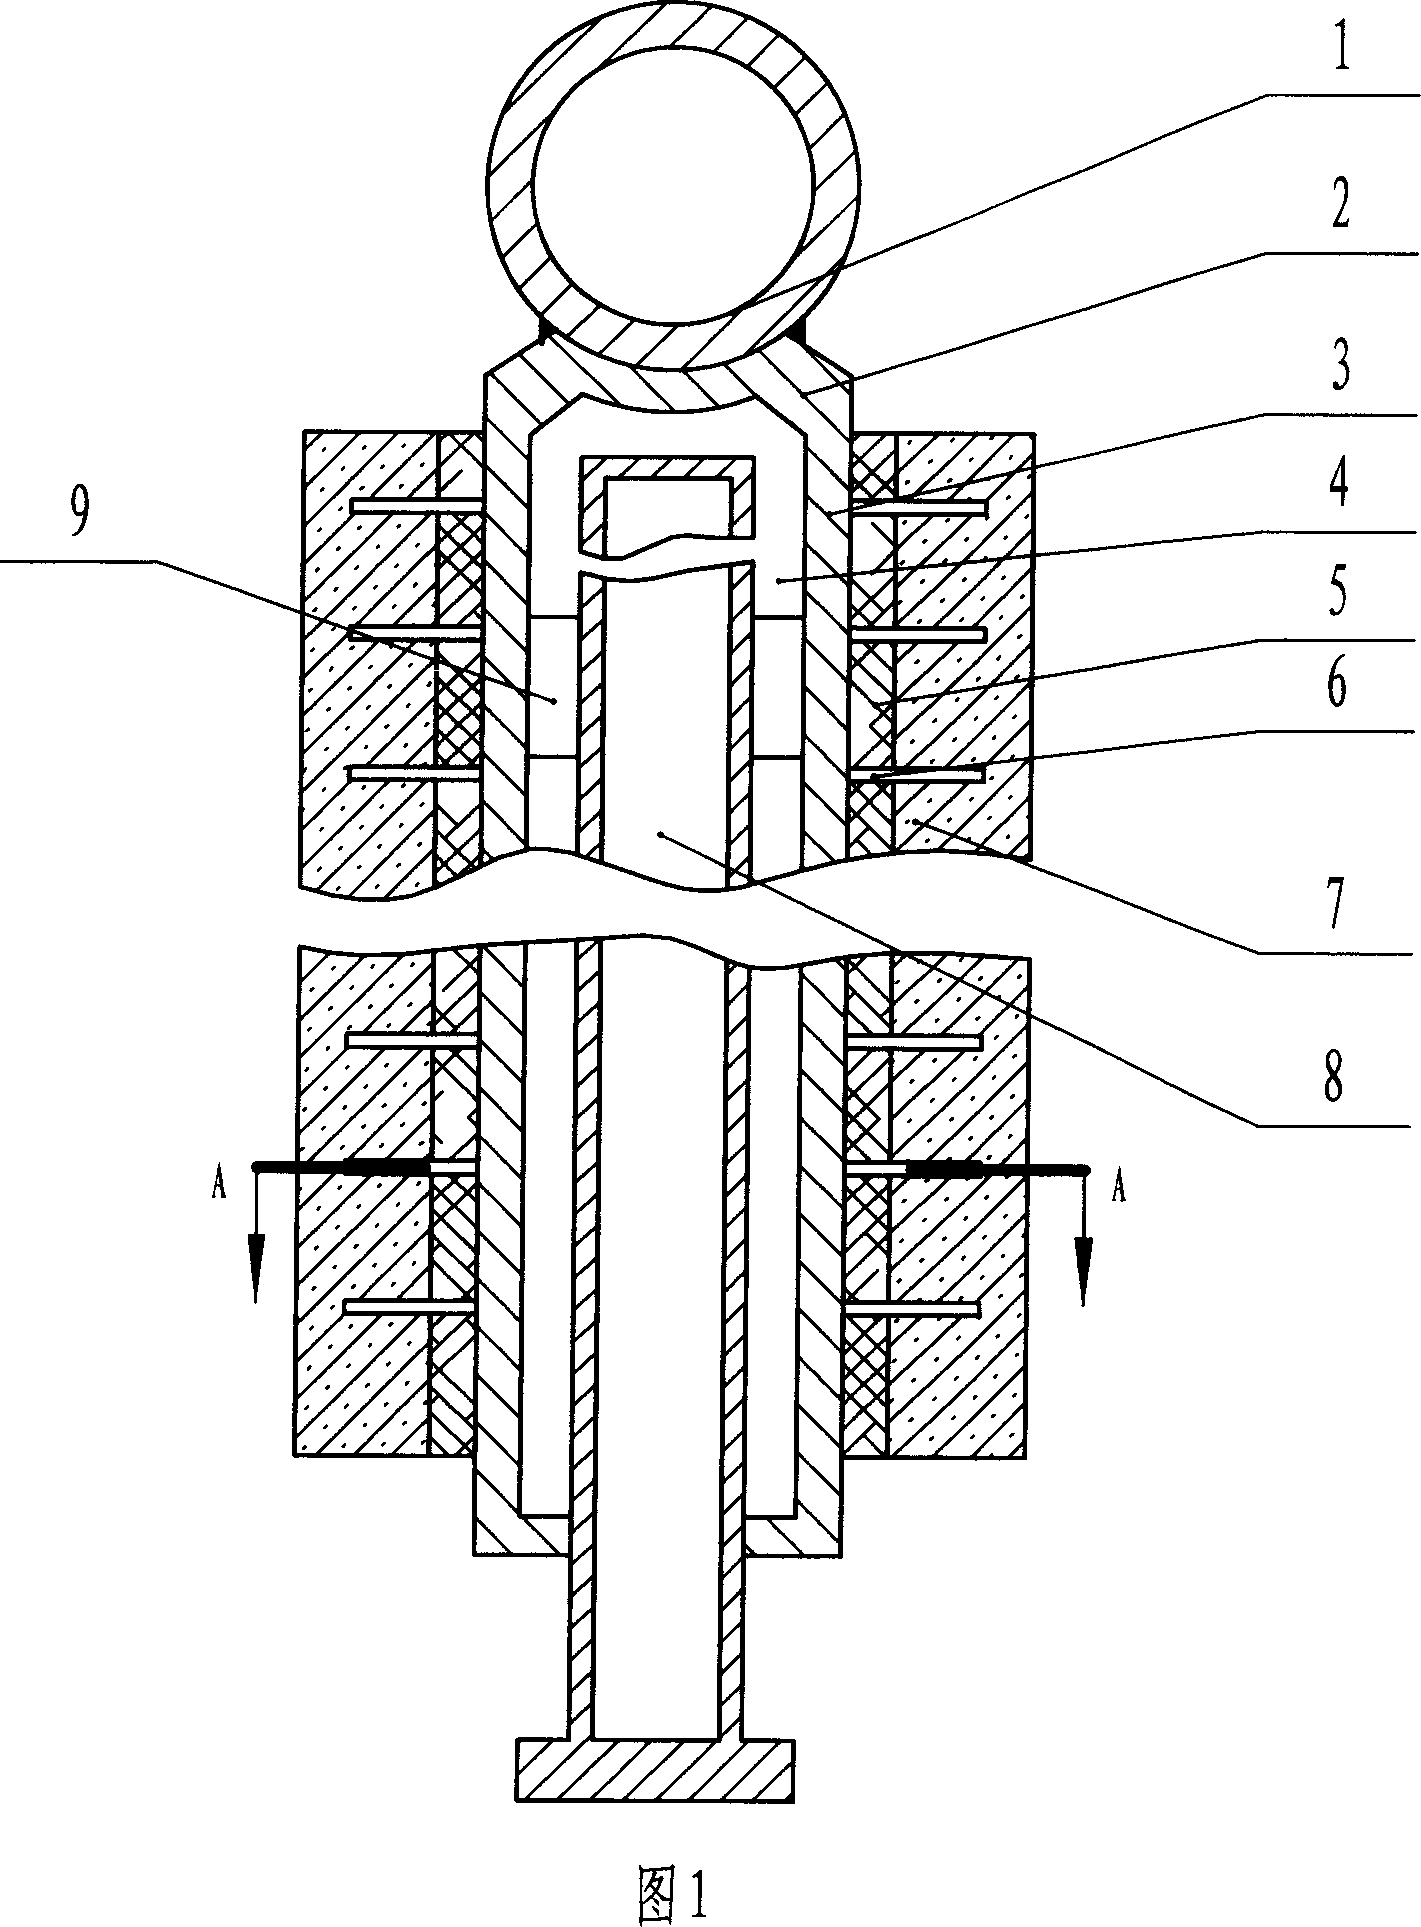 Step heating furnace beam and pole and its construction method